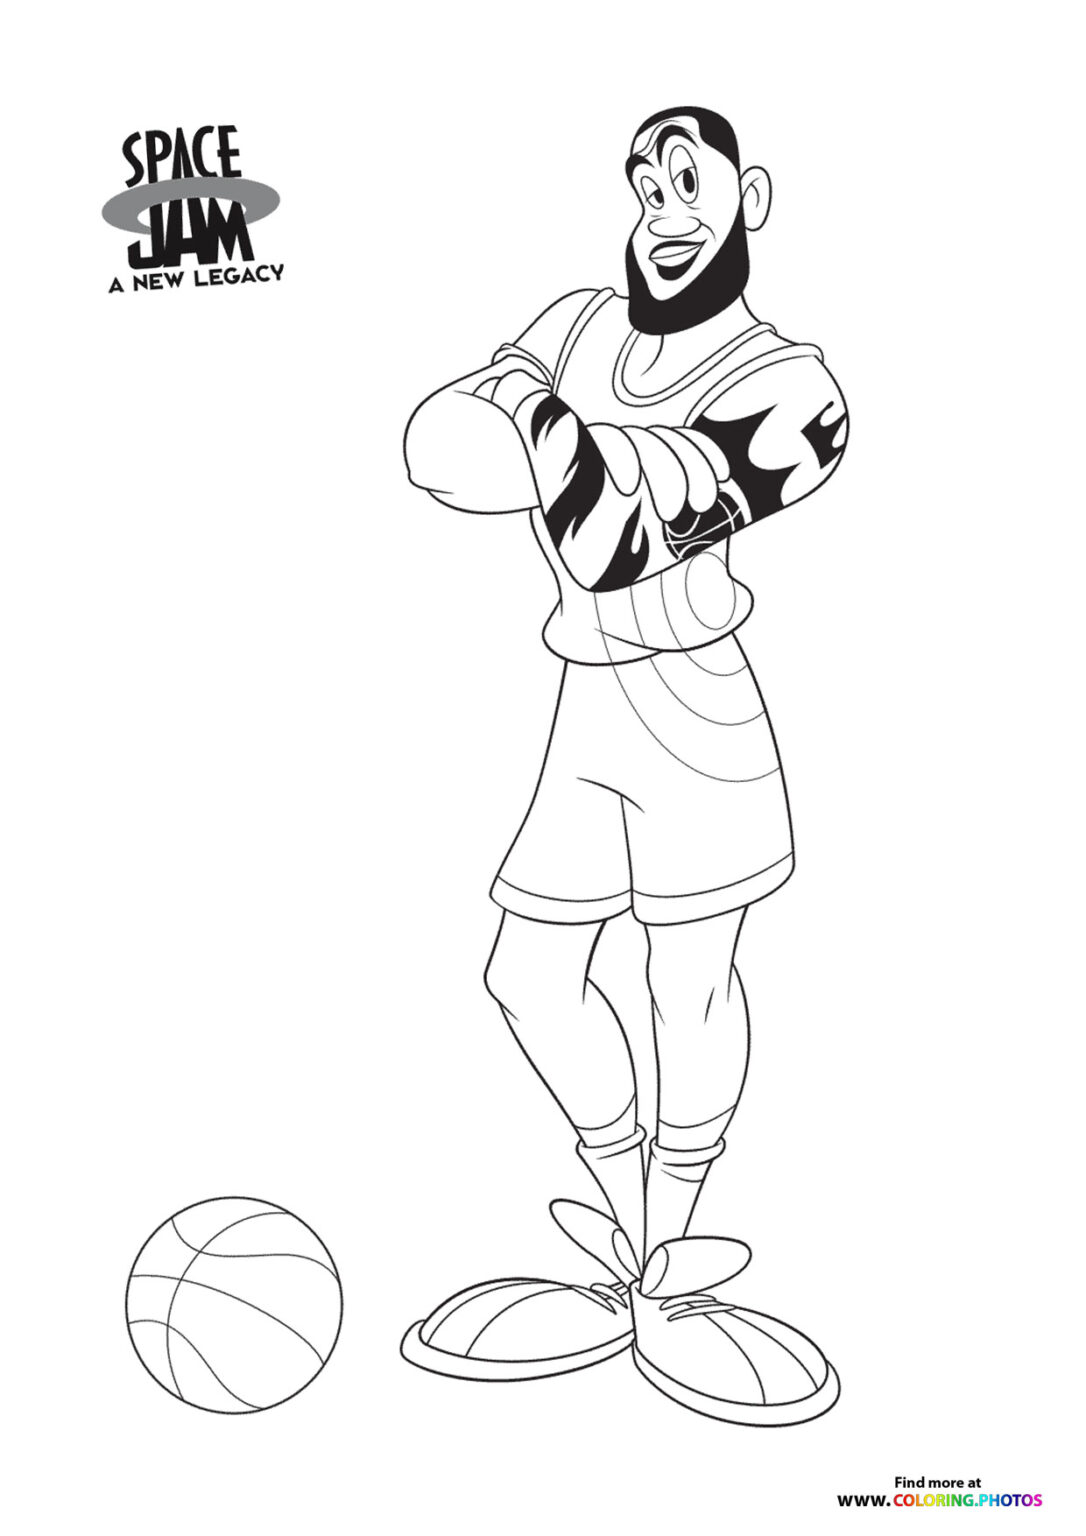 LeBron James posing Space Jam A new legacy Coloring Pages for kids